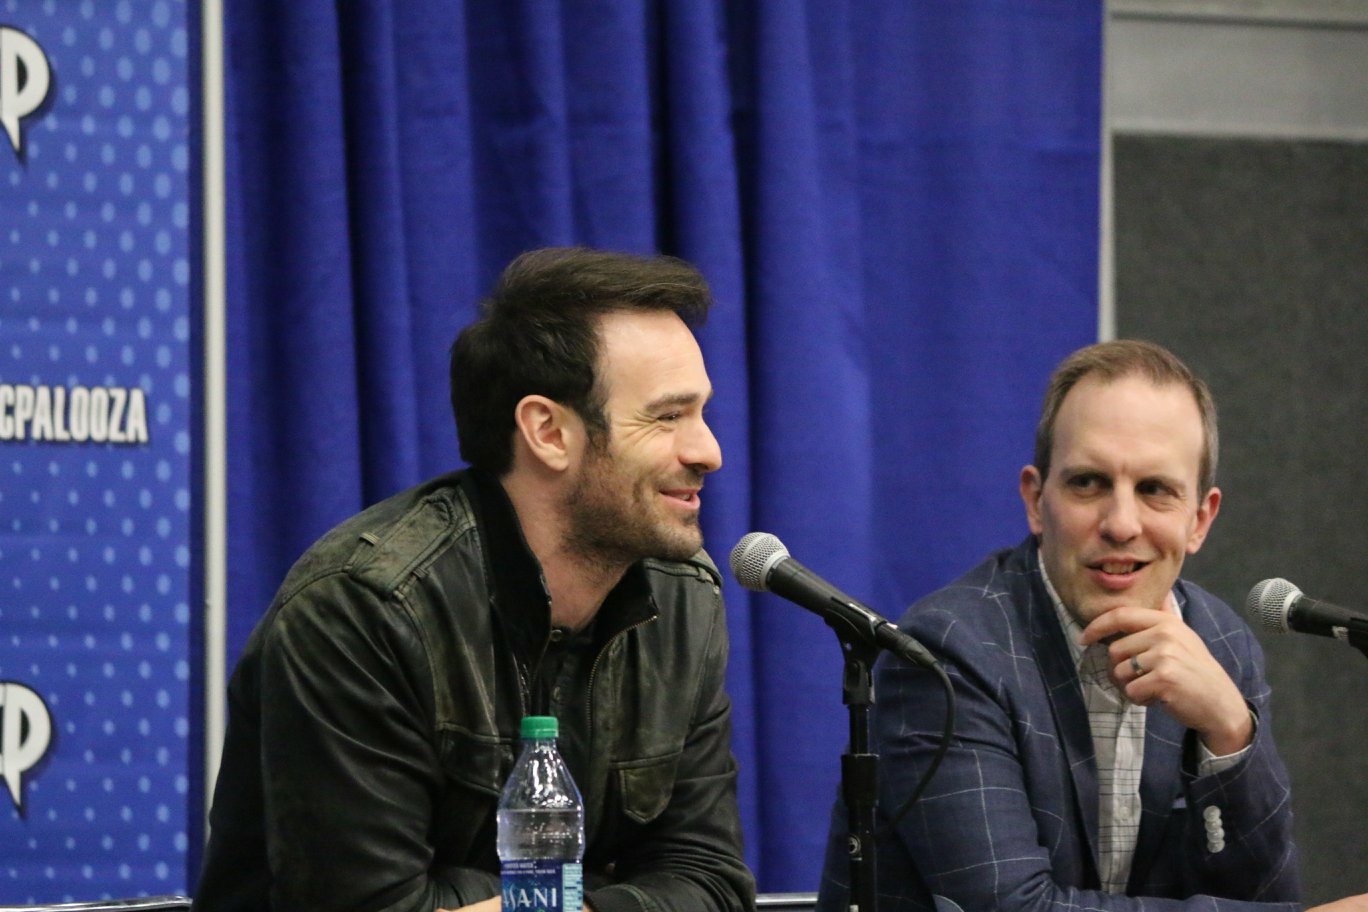 PHOTO: Star of Netflix's Defenders and Daredevil ,Charlie Cox, takes questions from fans at Comicpalooza 2018. Photo by The Signal Editor-in-Chief Brandon Peña.